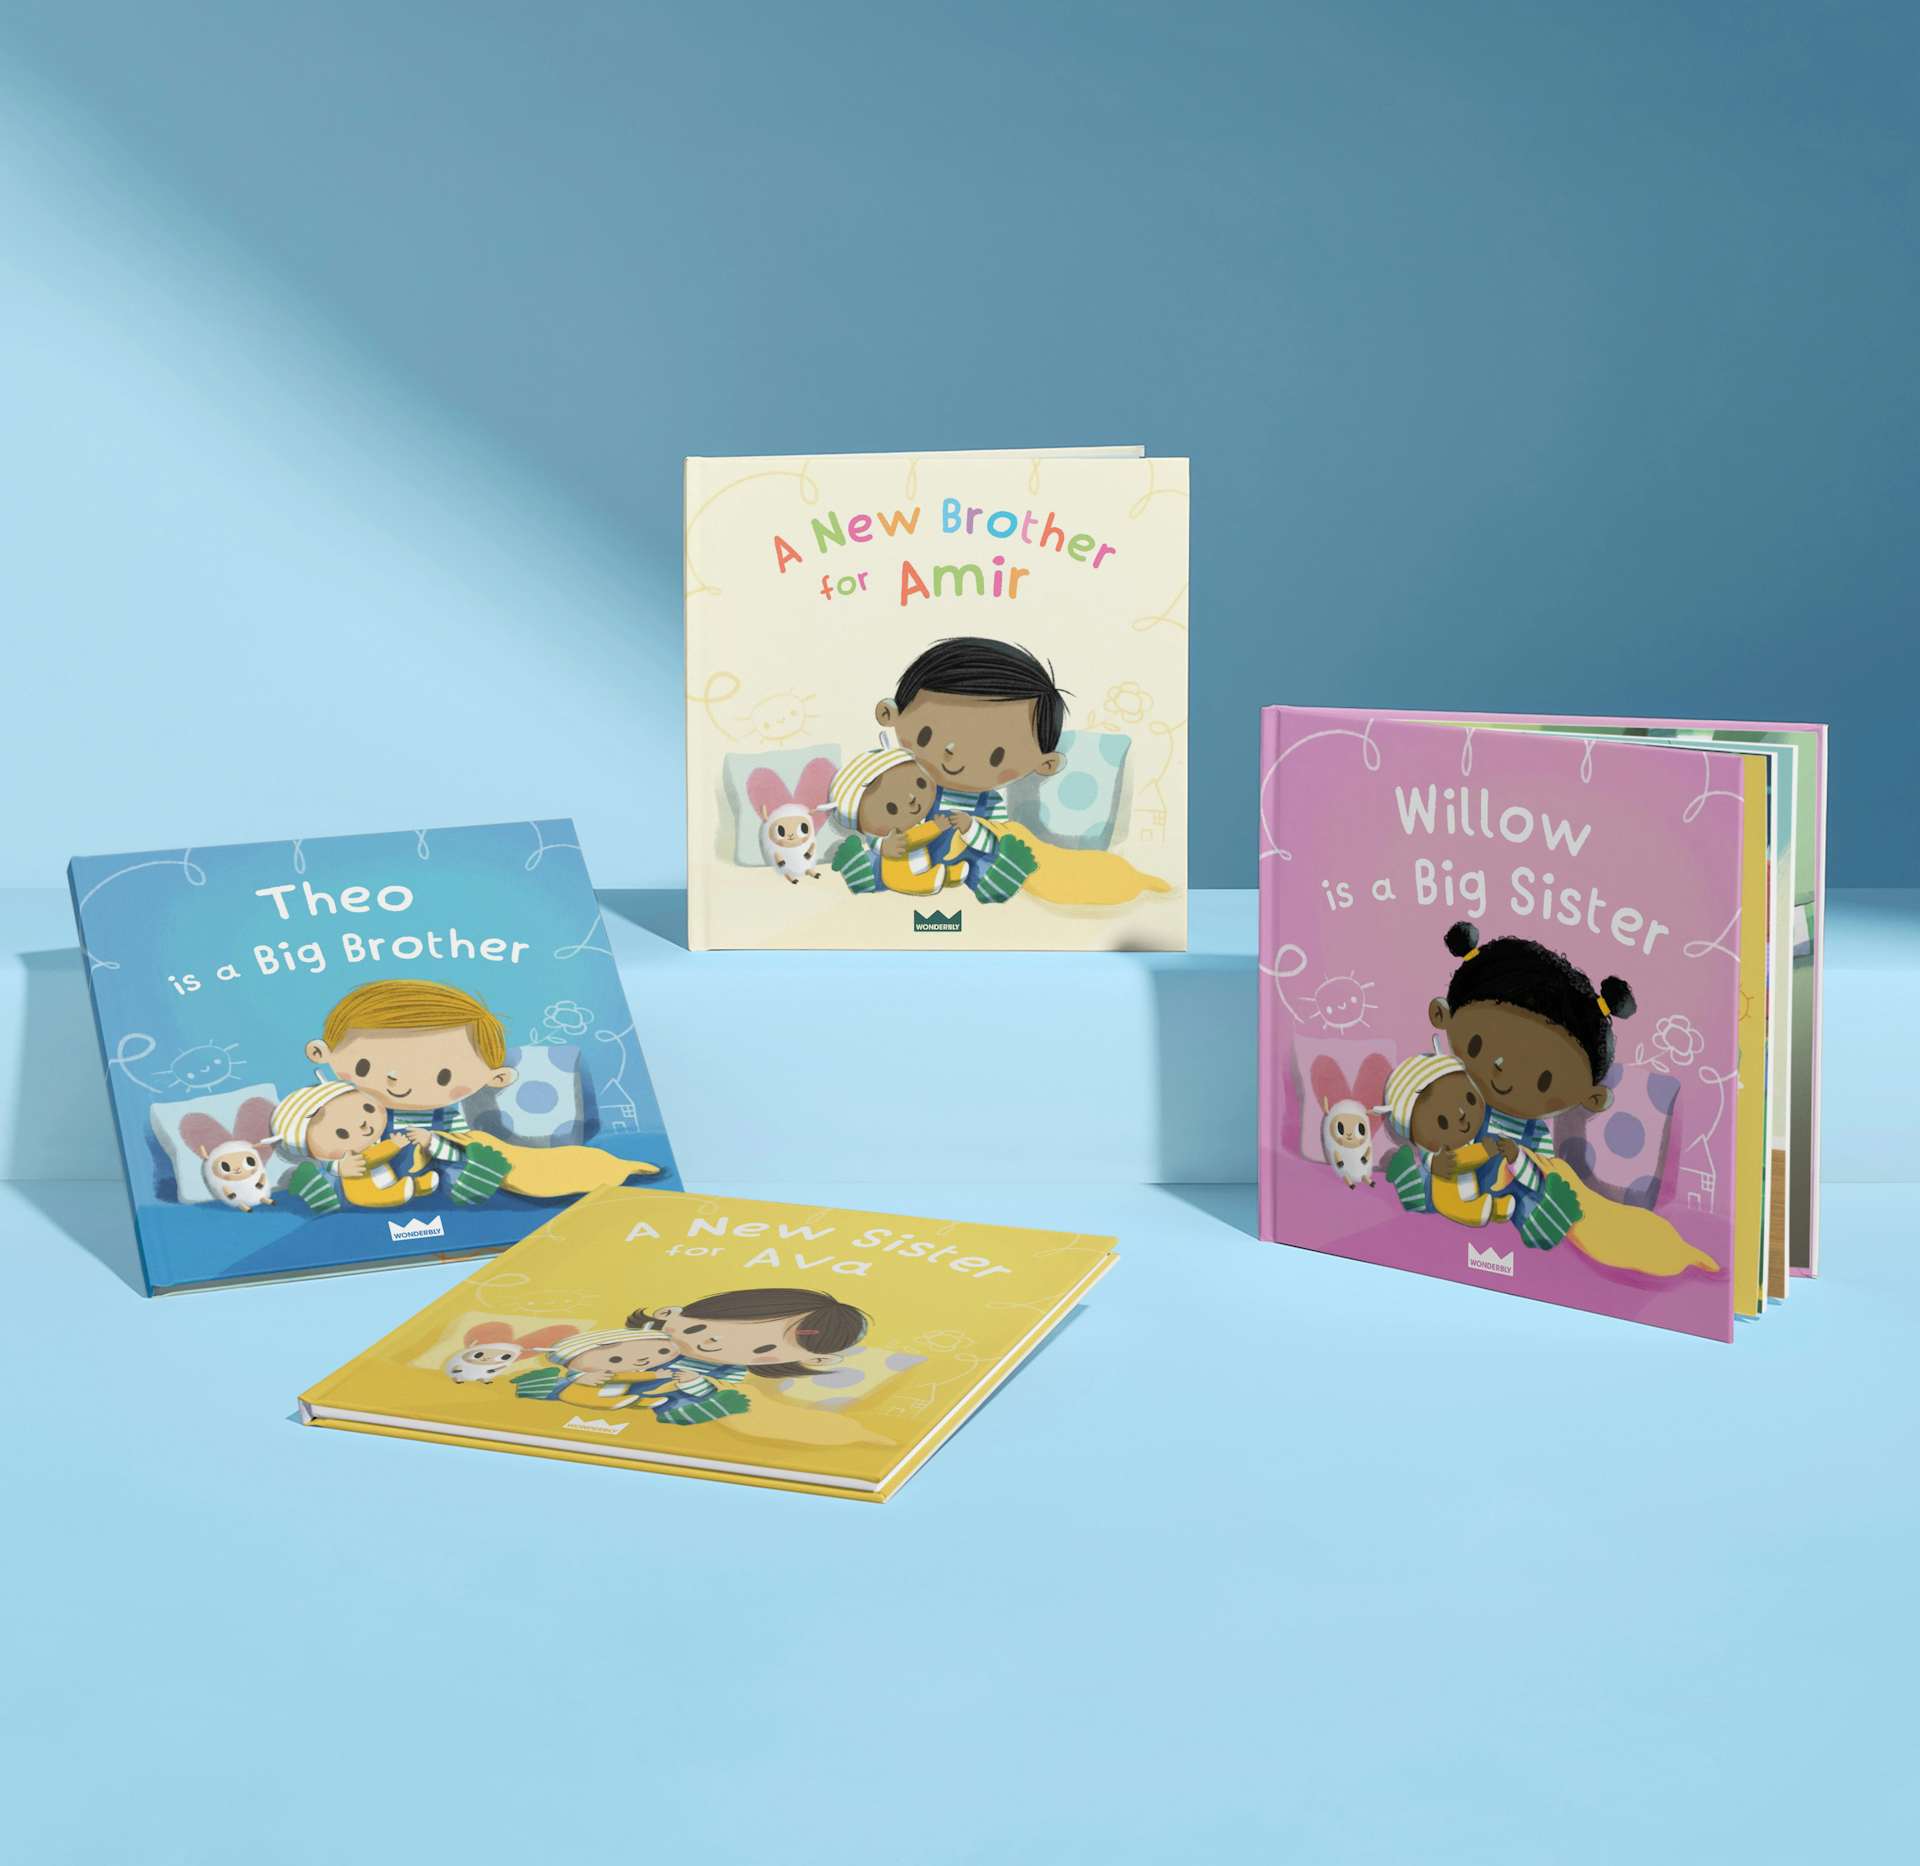 You Are My Sunshine: The Classic Nursery Rhyme Illustrated with Positive Imagery of People of Color [Book]